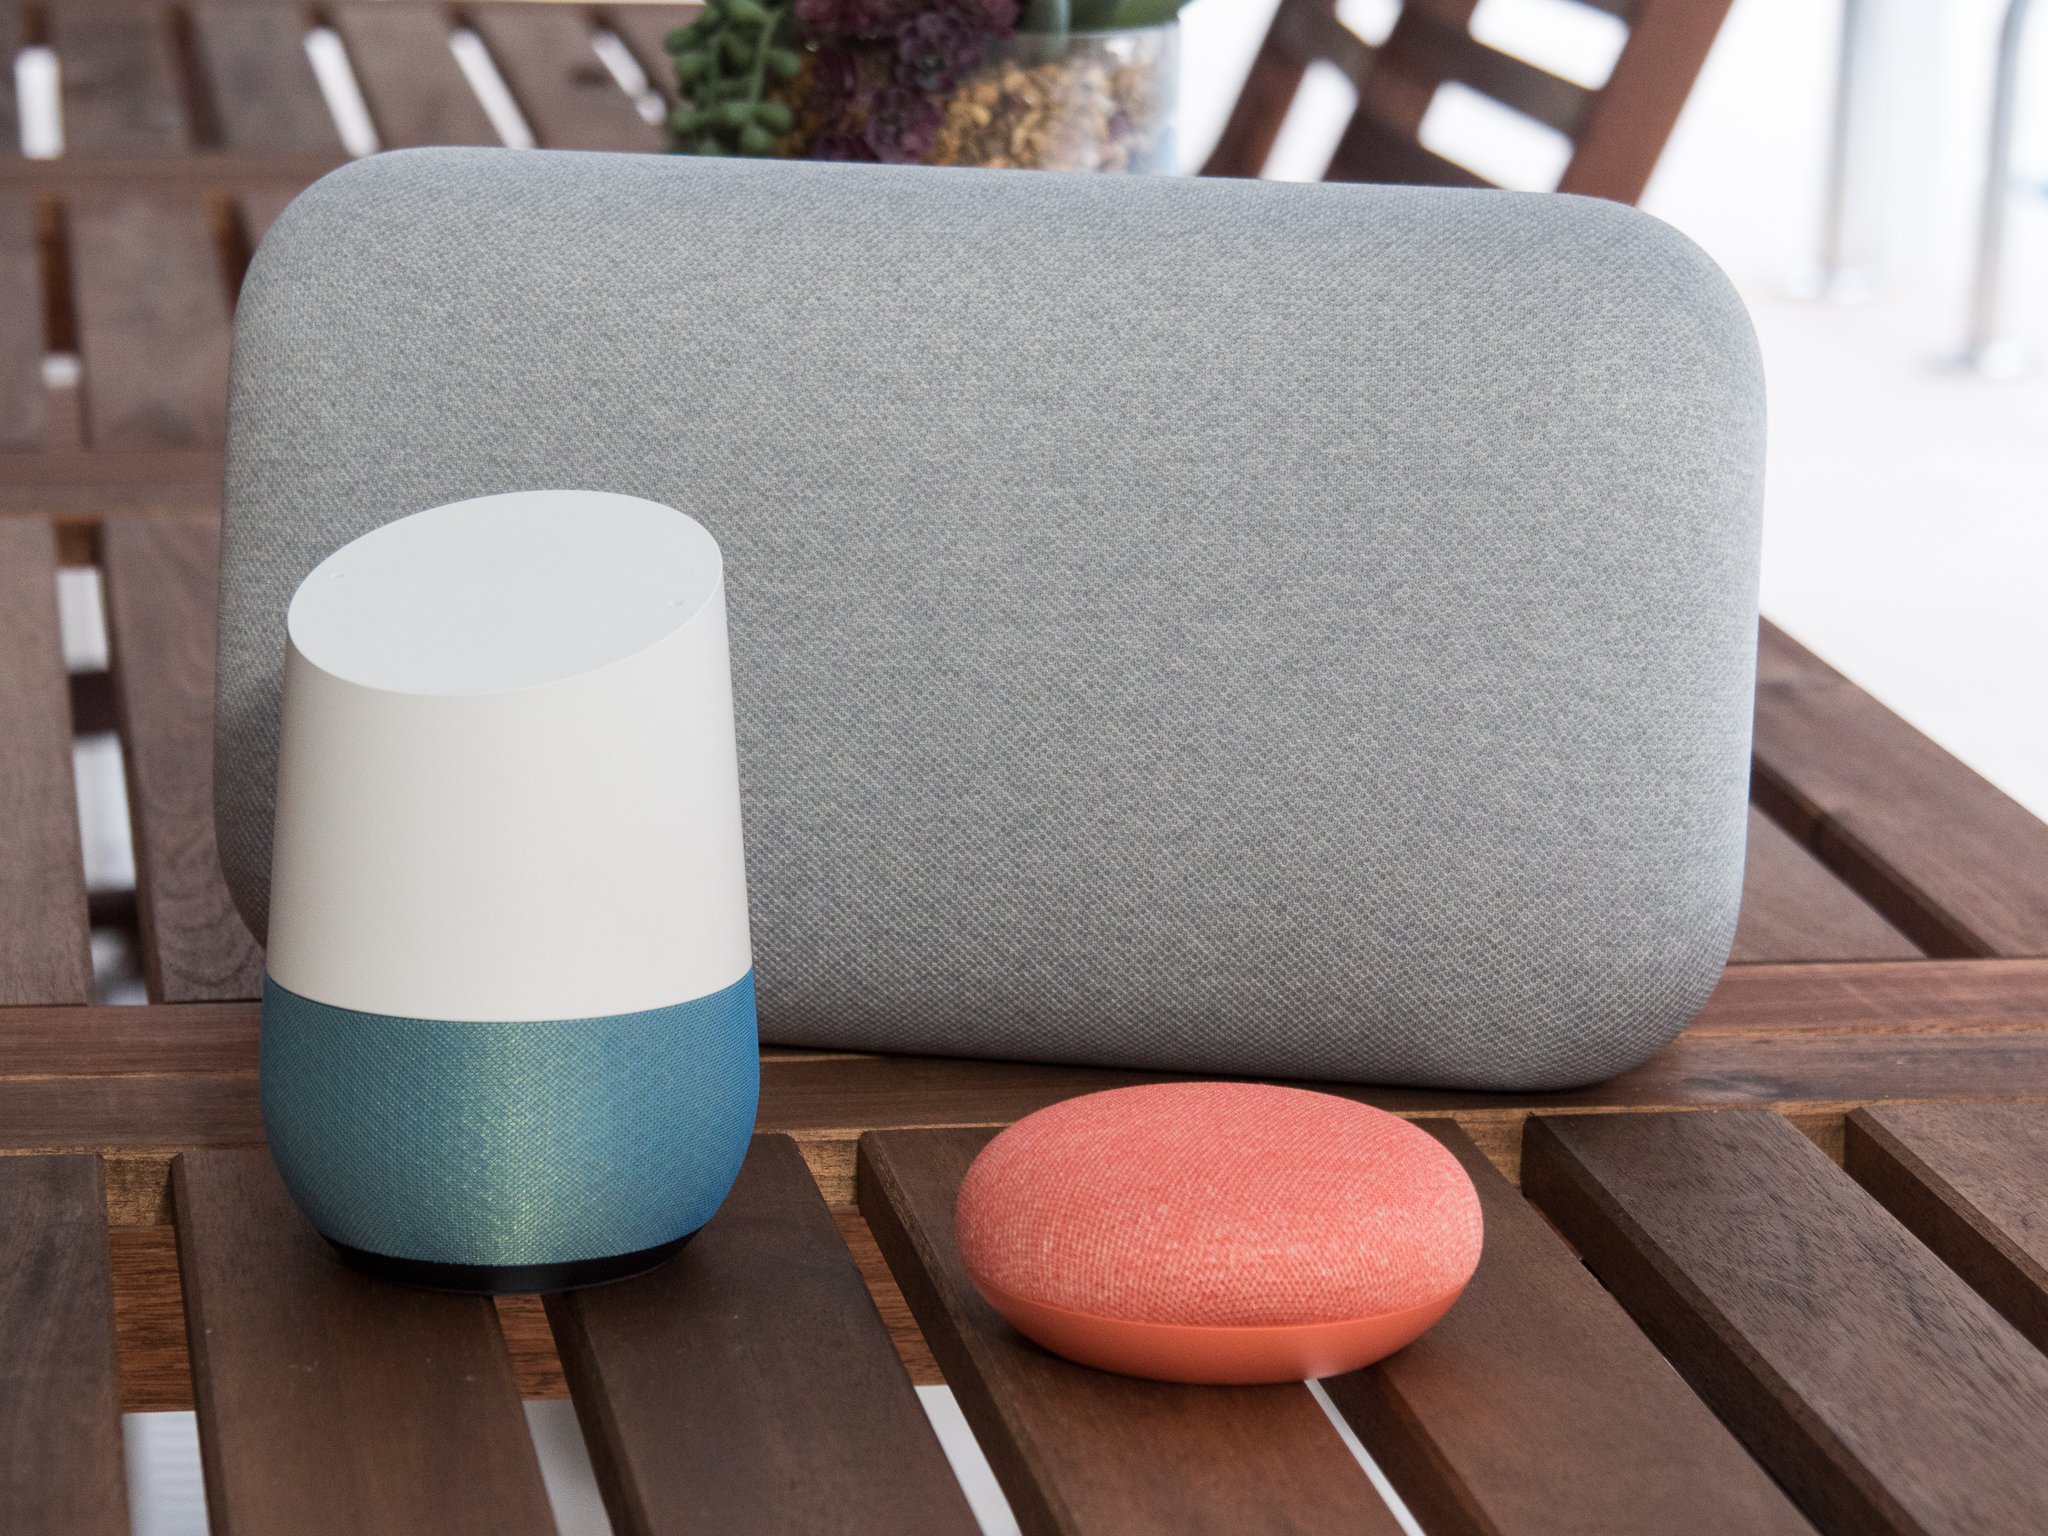 Google Assistant is ready and built-in to specific speakers